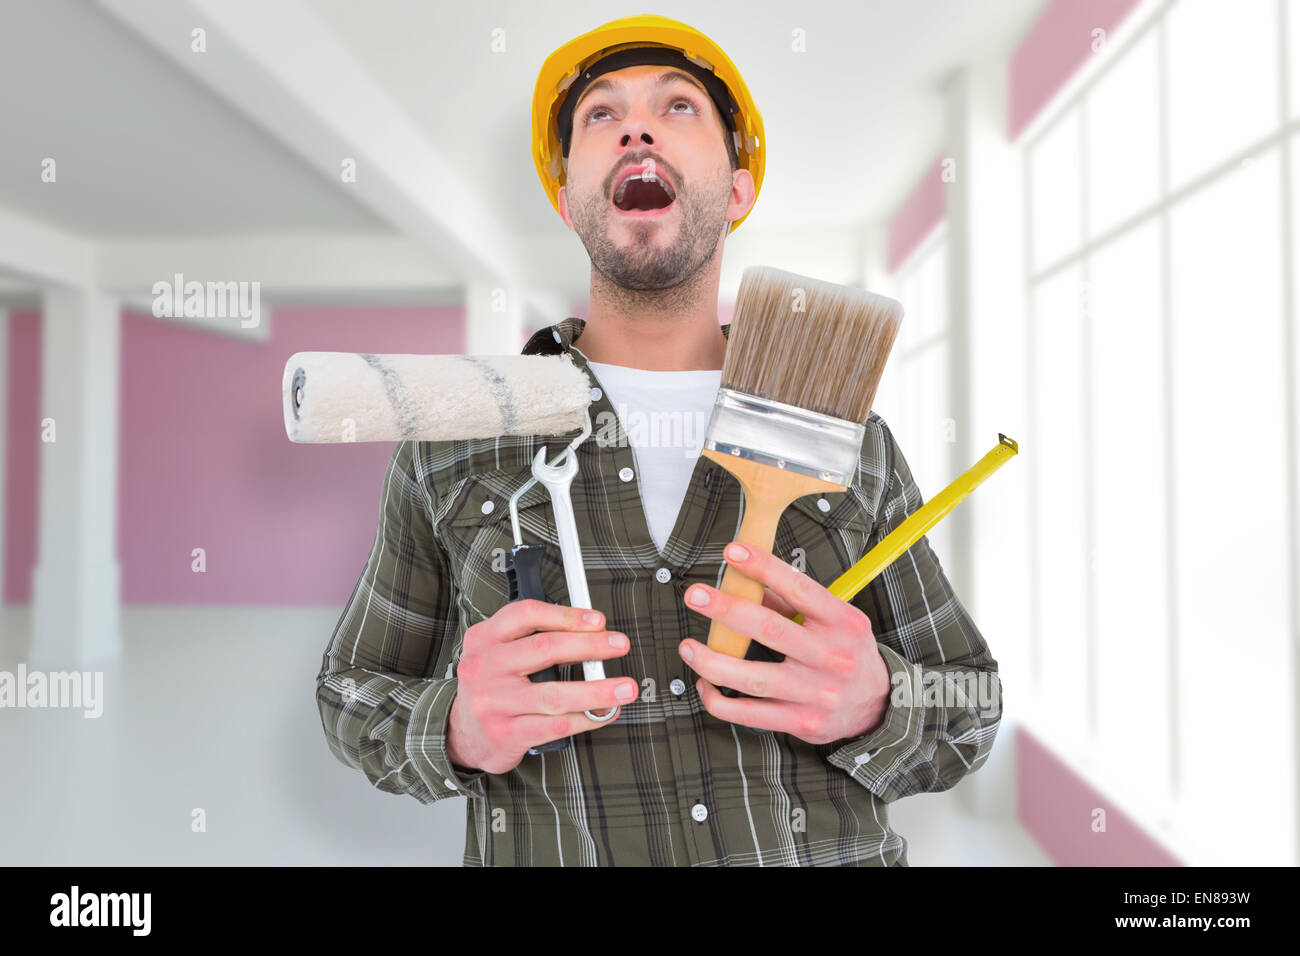 Composite image of screaming manual worker holding various tools Stock Photo